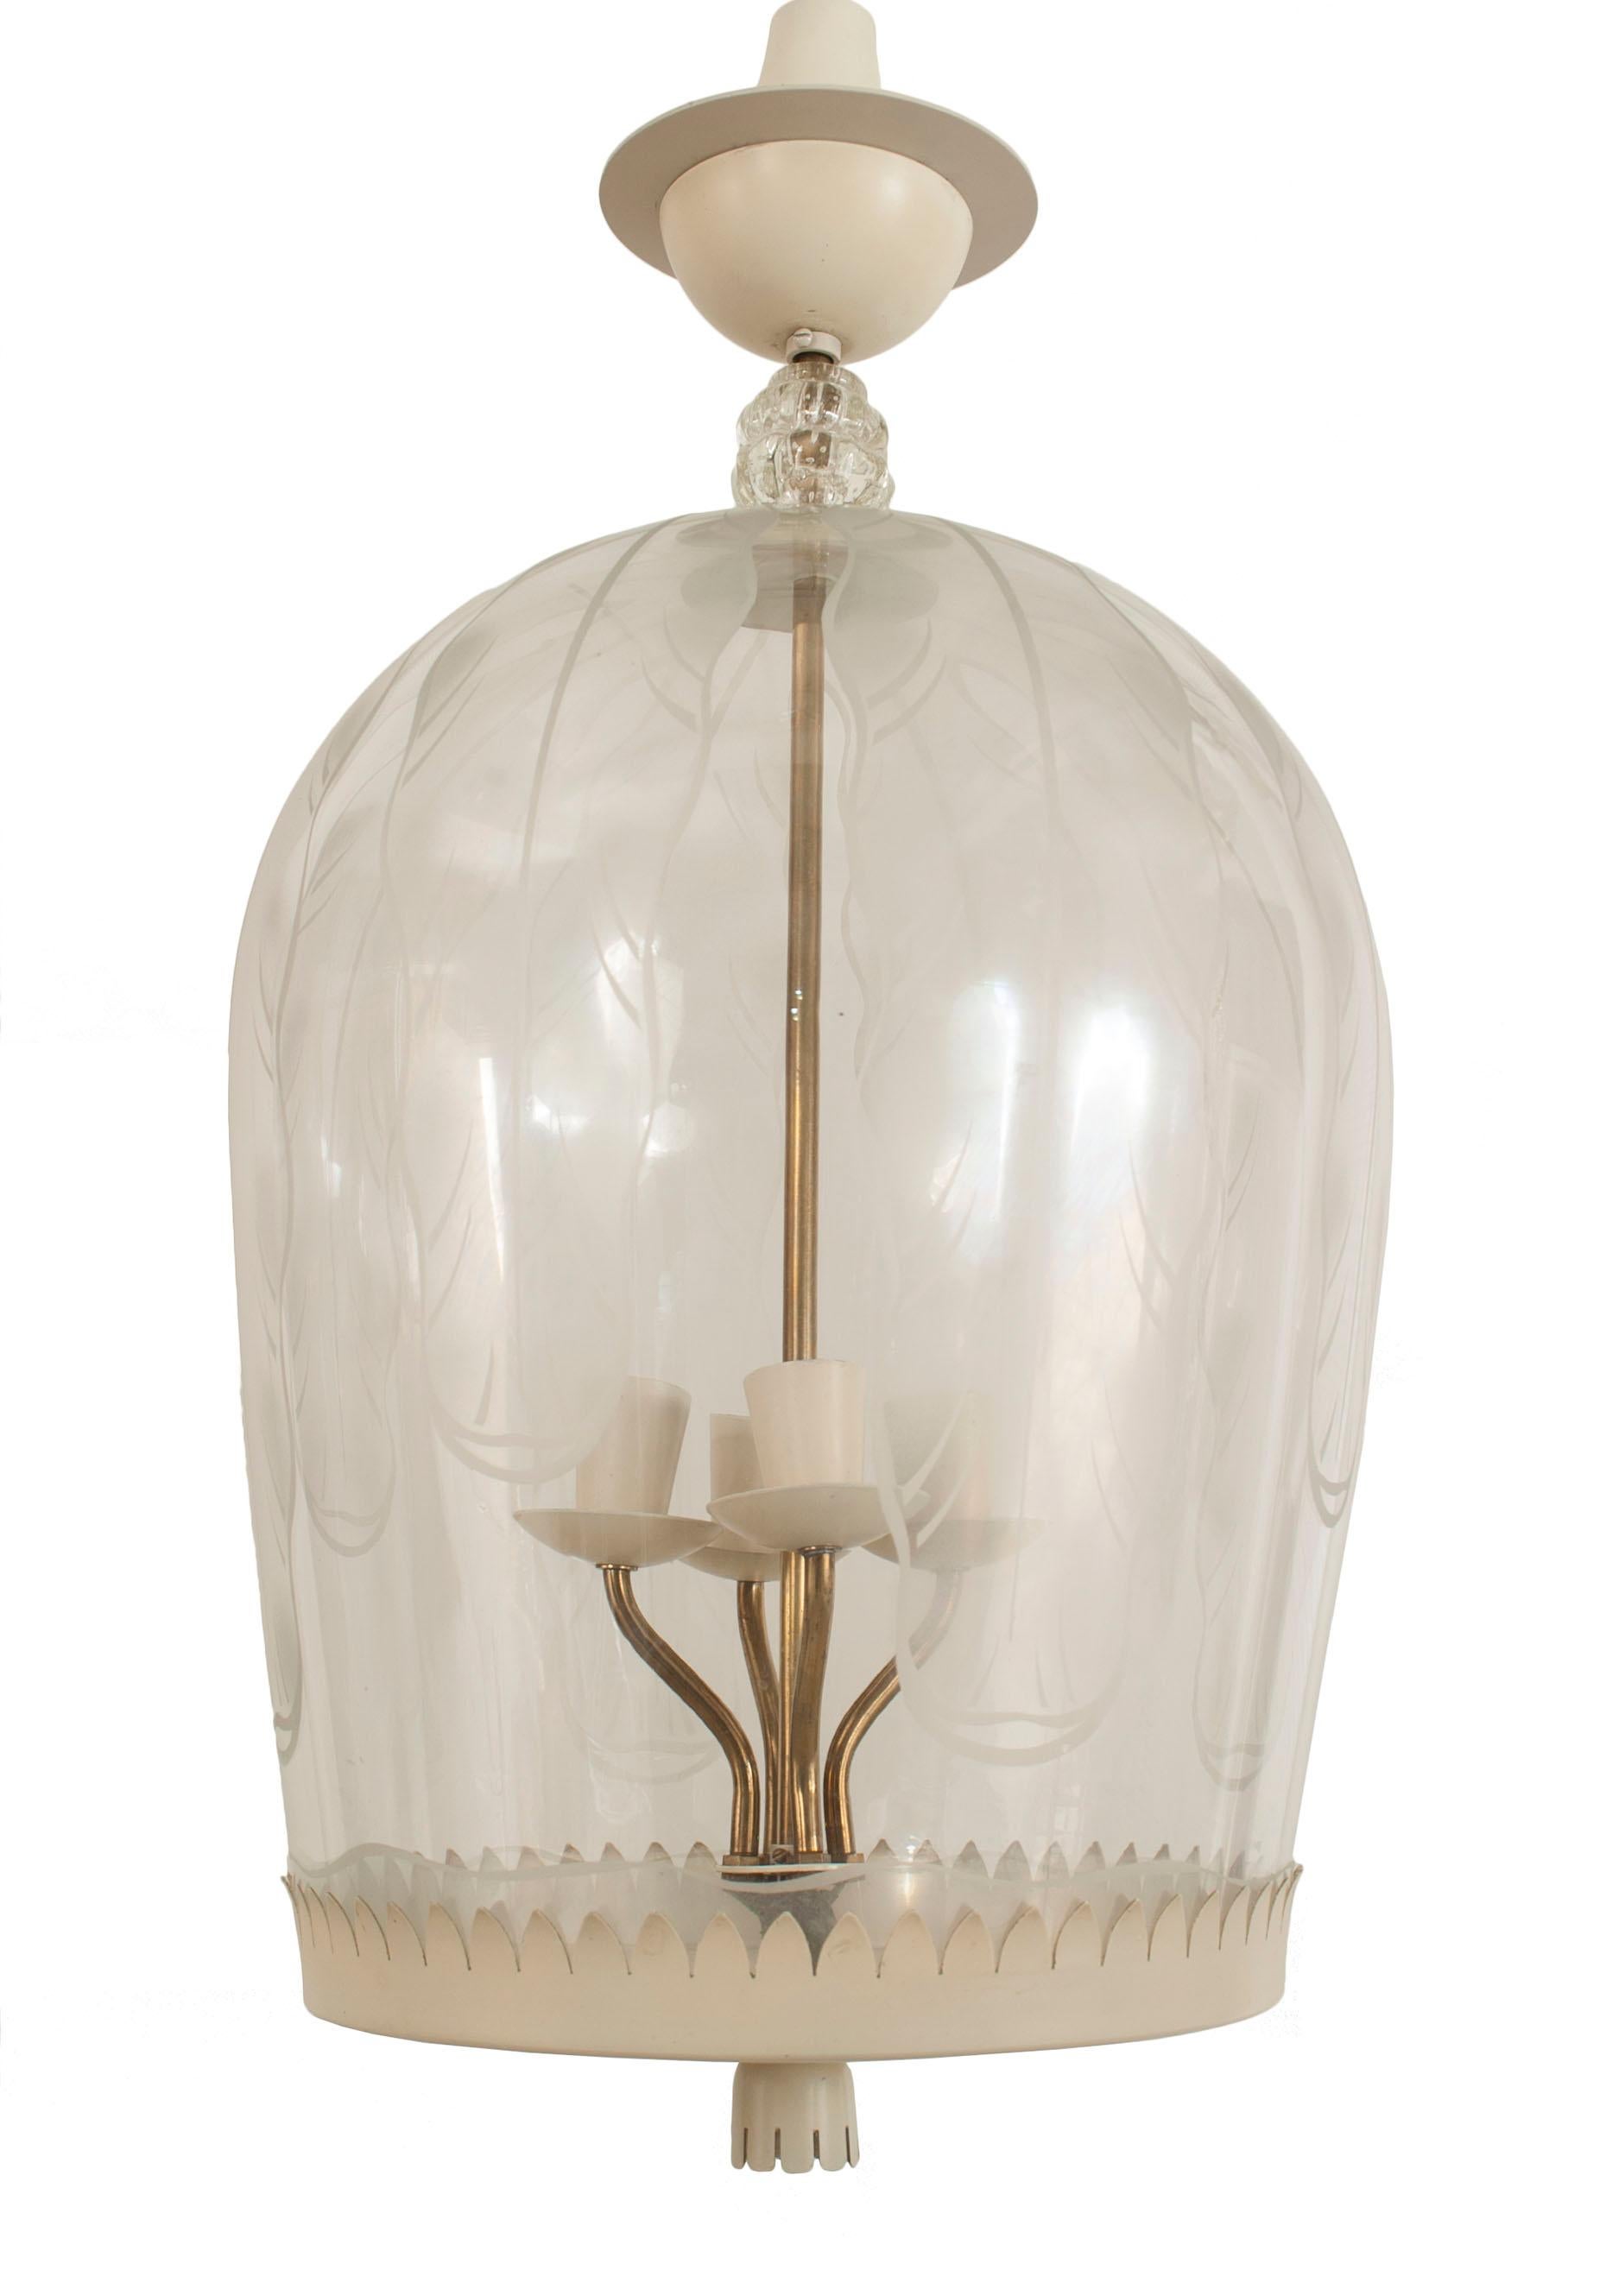 Italian Mid-Century Fontana Arte Glass Dome Lantern In Good Condition For Sale In New York, NY